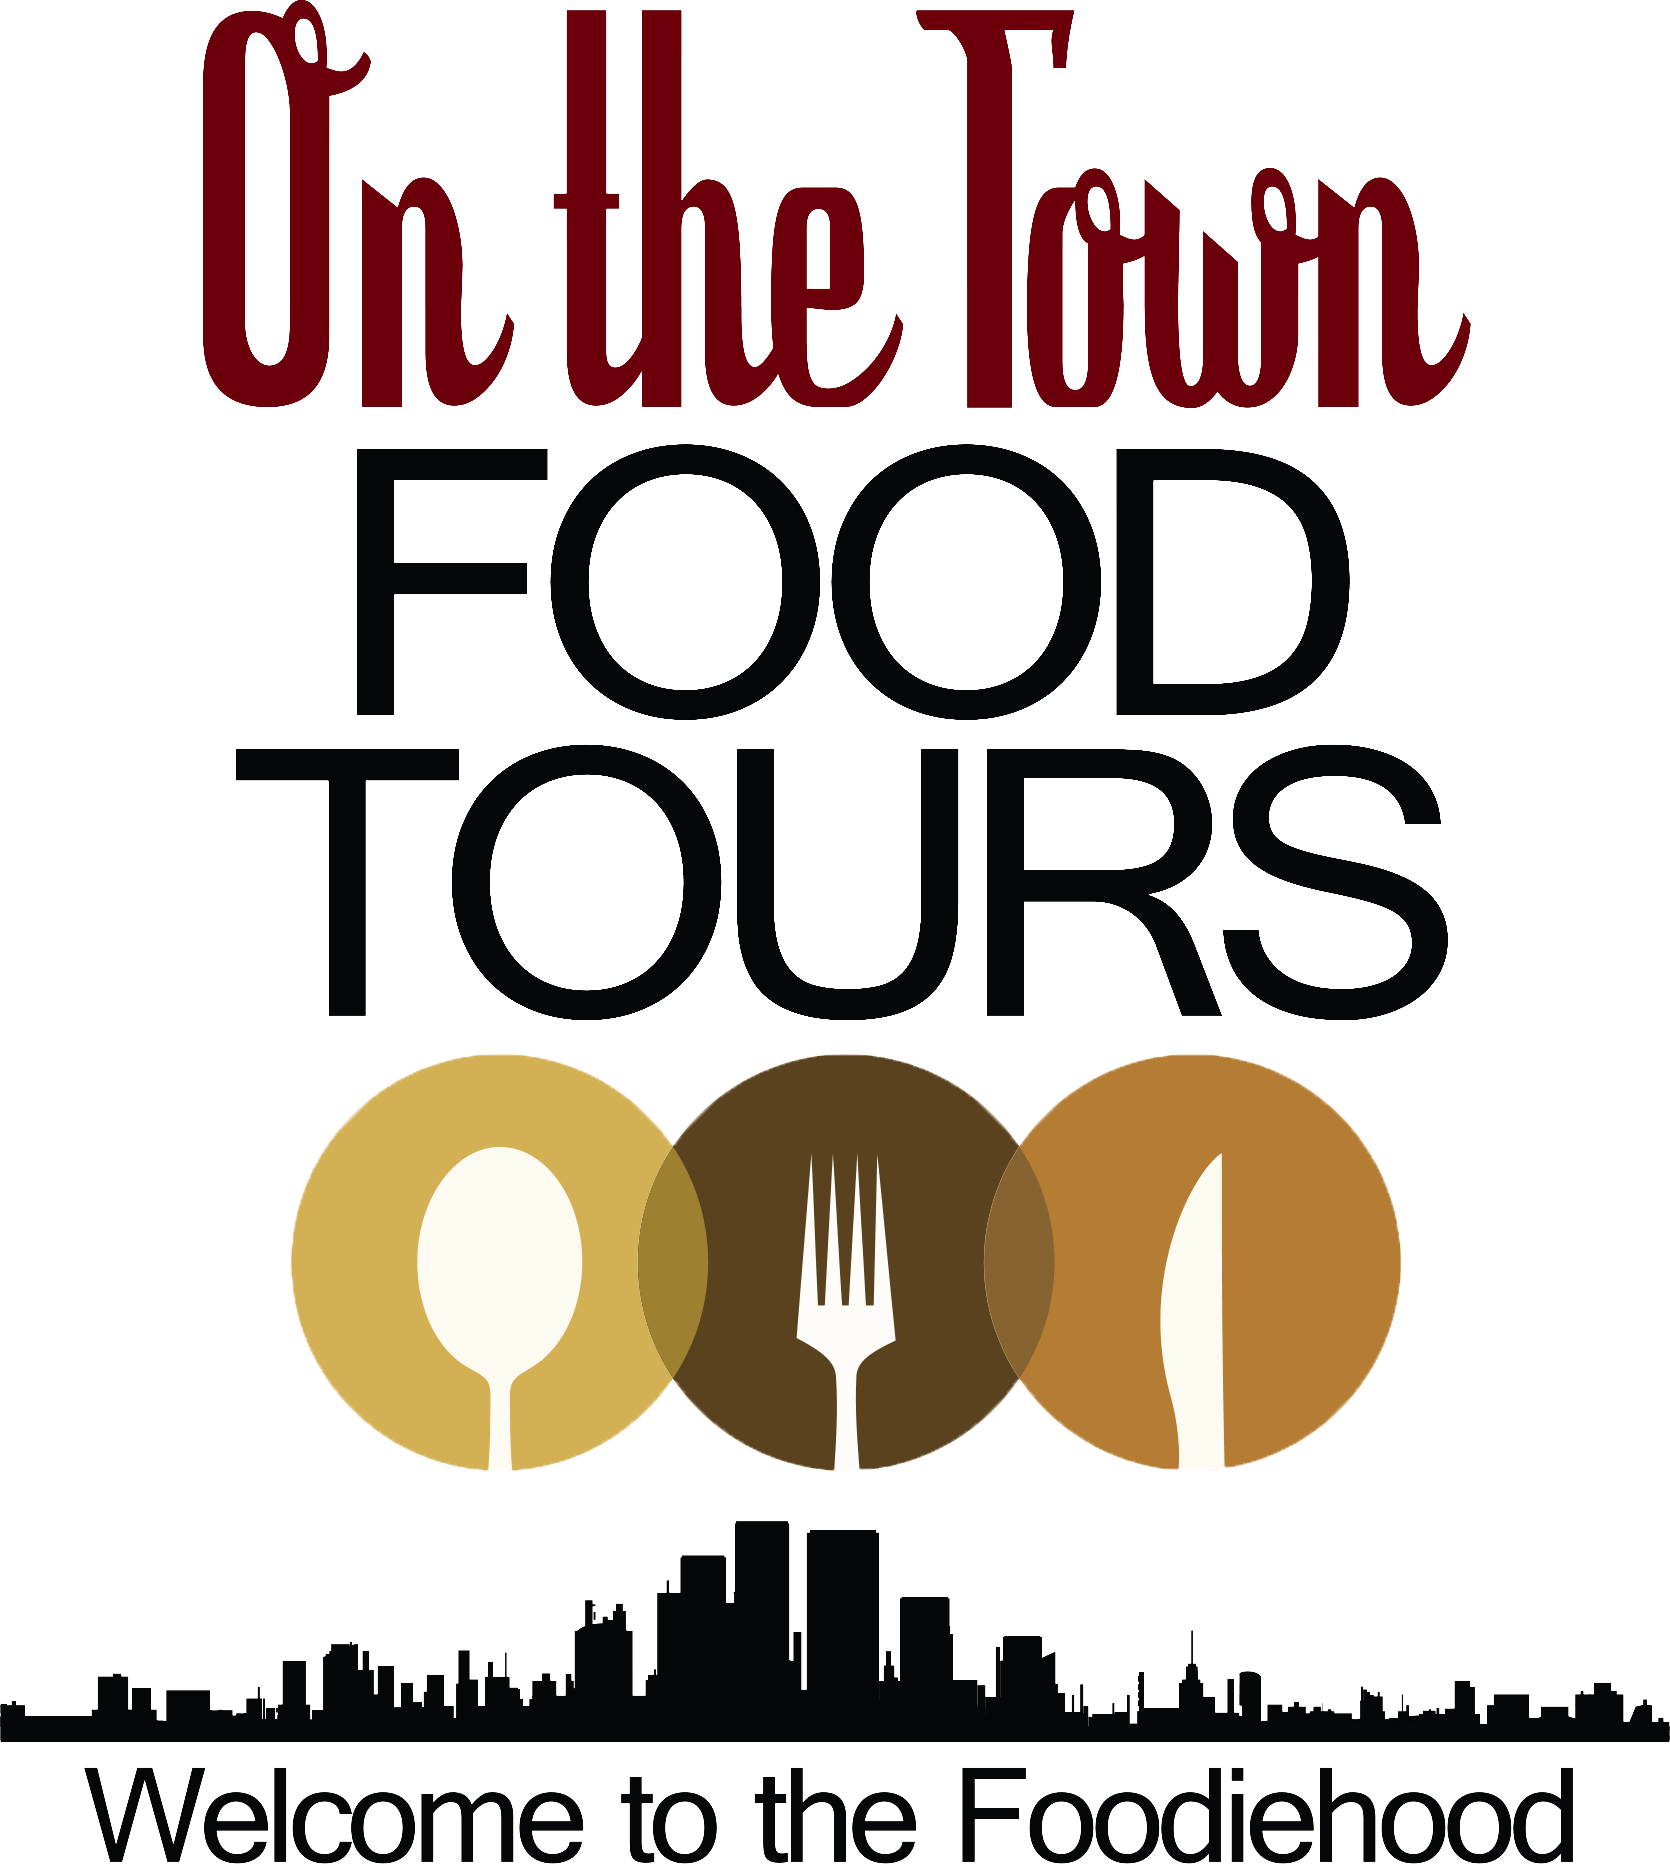 On the Town Food Tours LLC